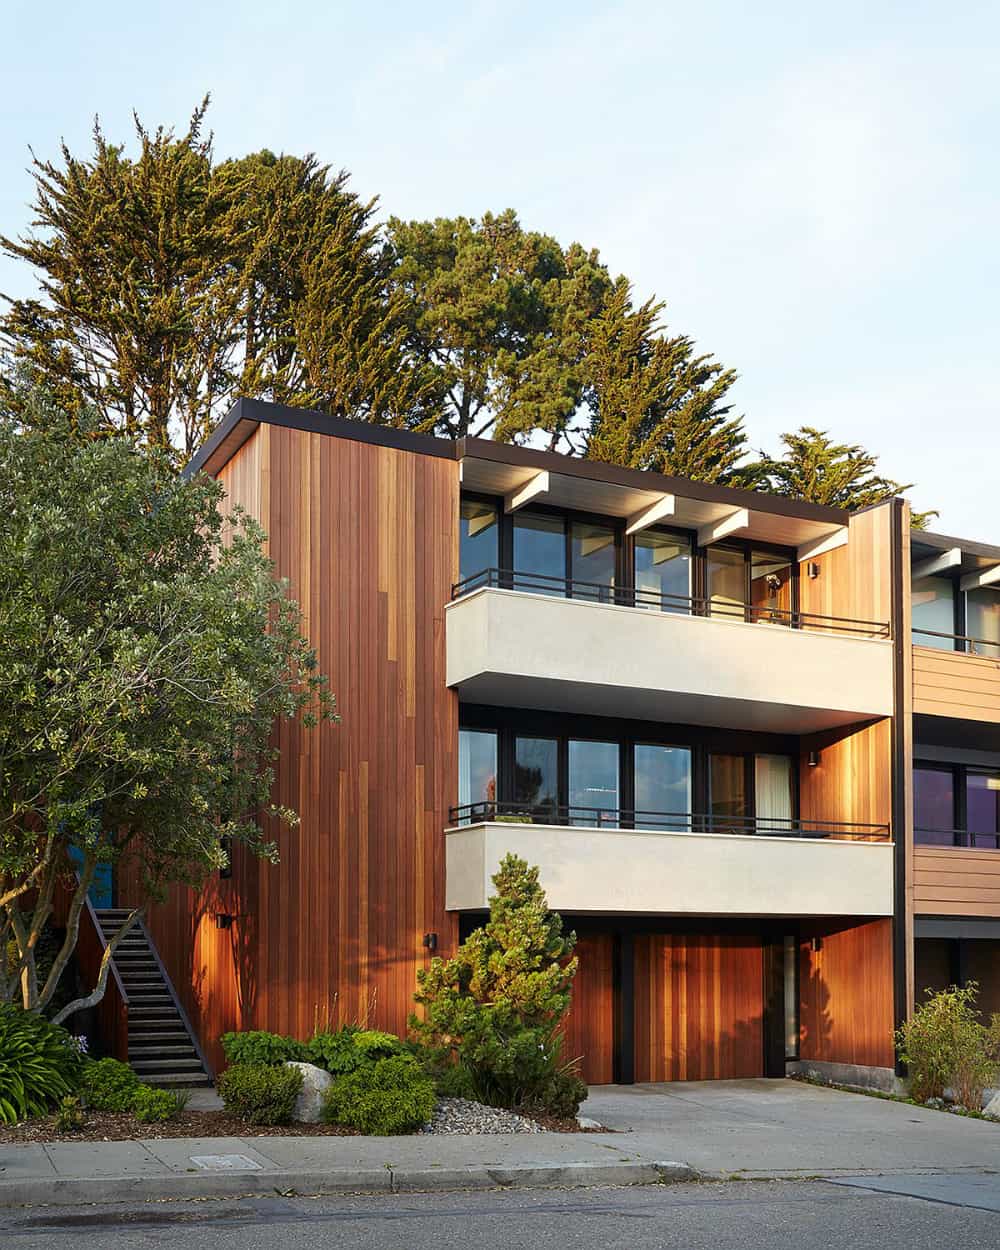 Kayu Batu wood siding contrasts with black framing which always makes for a stylish look